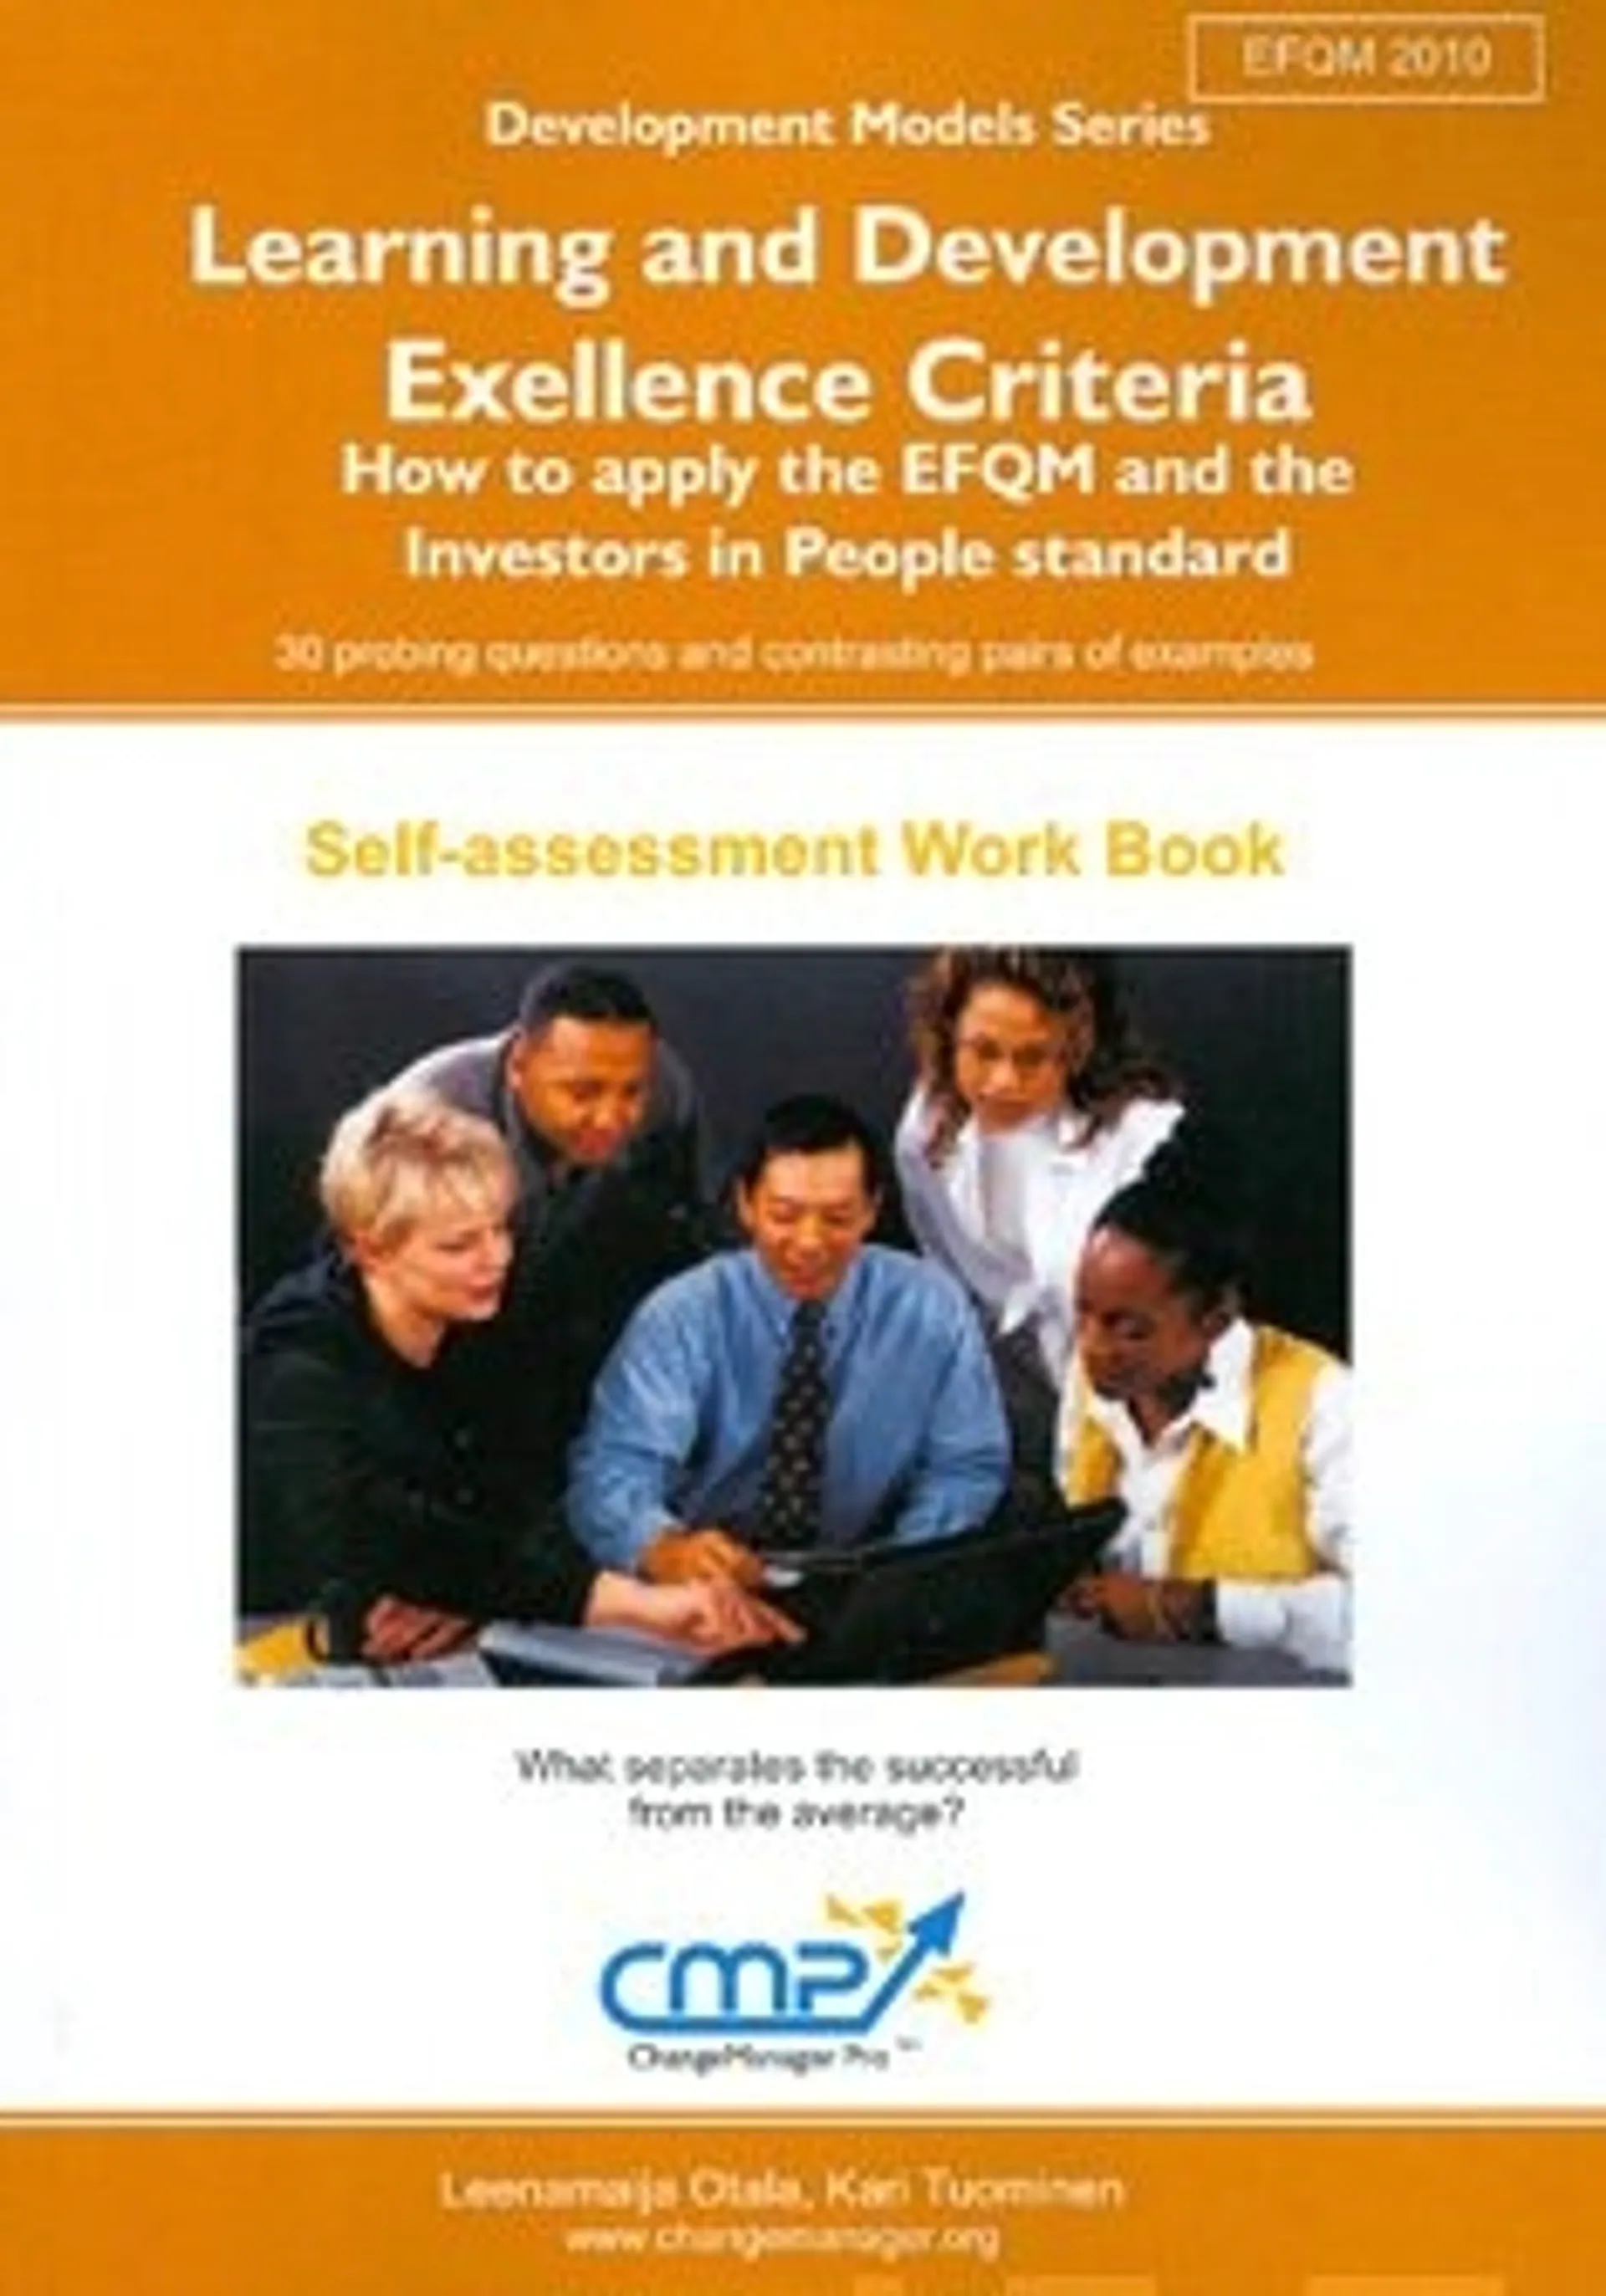 Learning and Development - Excellence Criteria - EFQM 2010